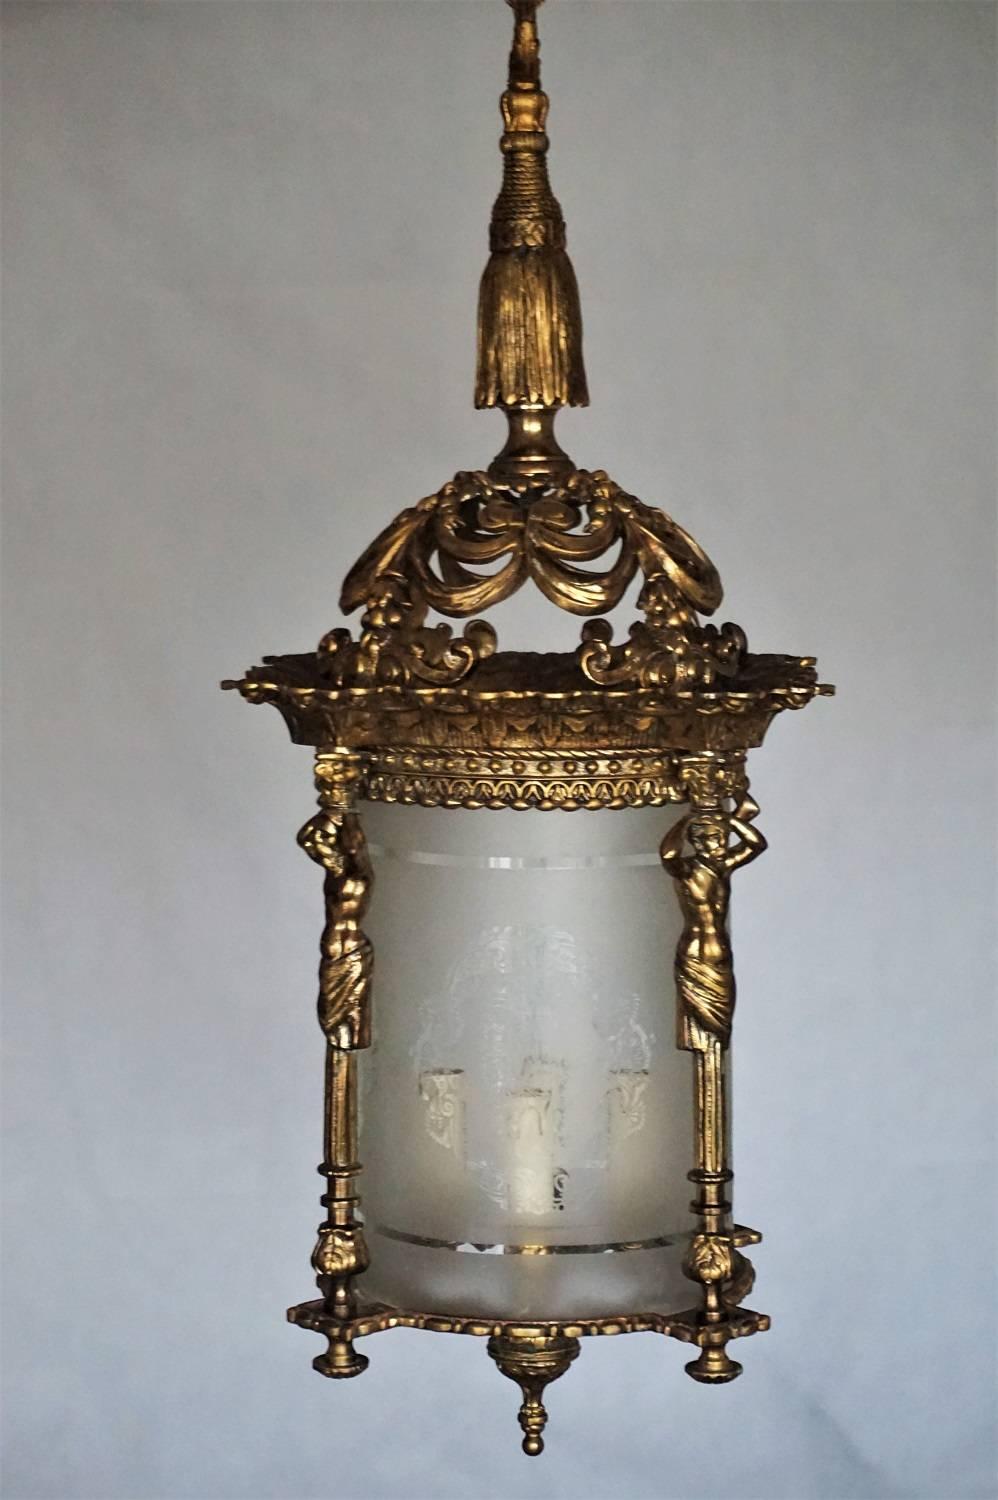 Etched Large French Empire Style Fire-Gilded Bronze Four-Light Lantern, Chandelier